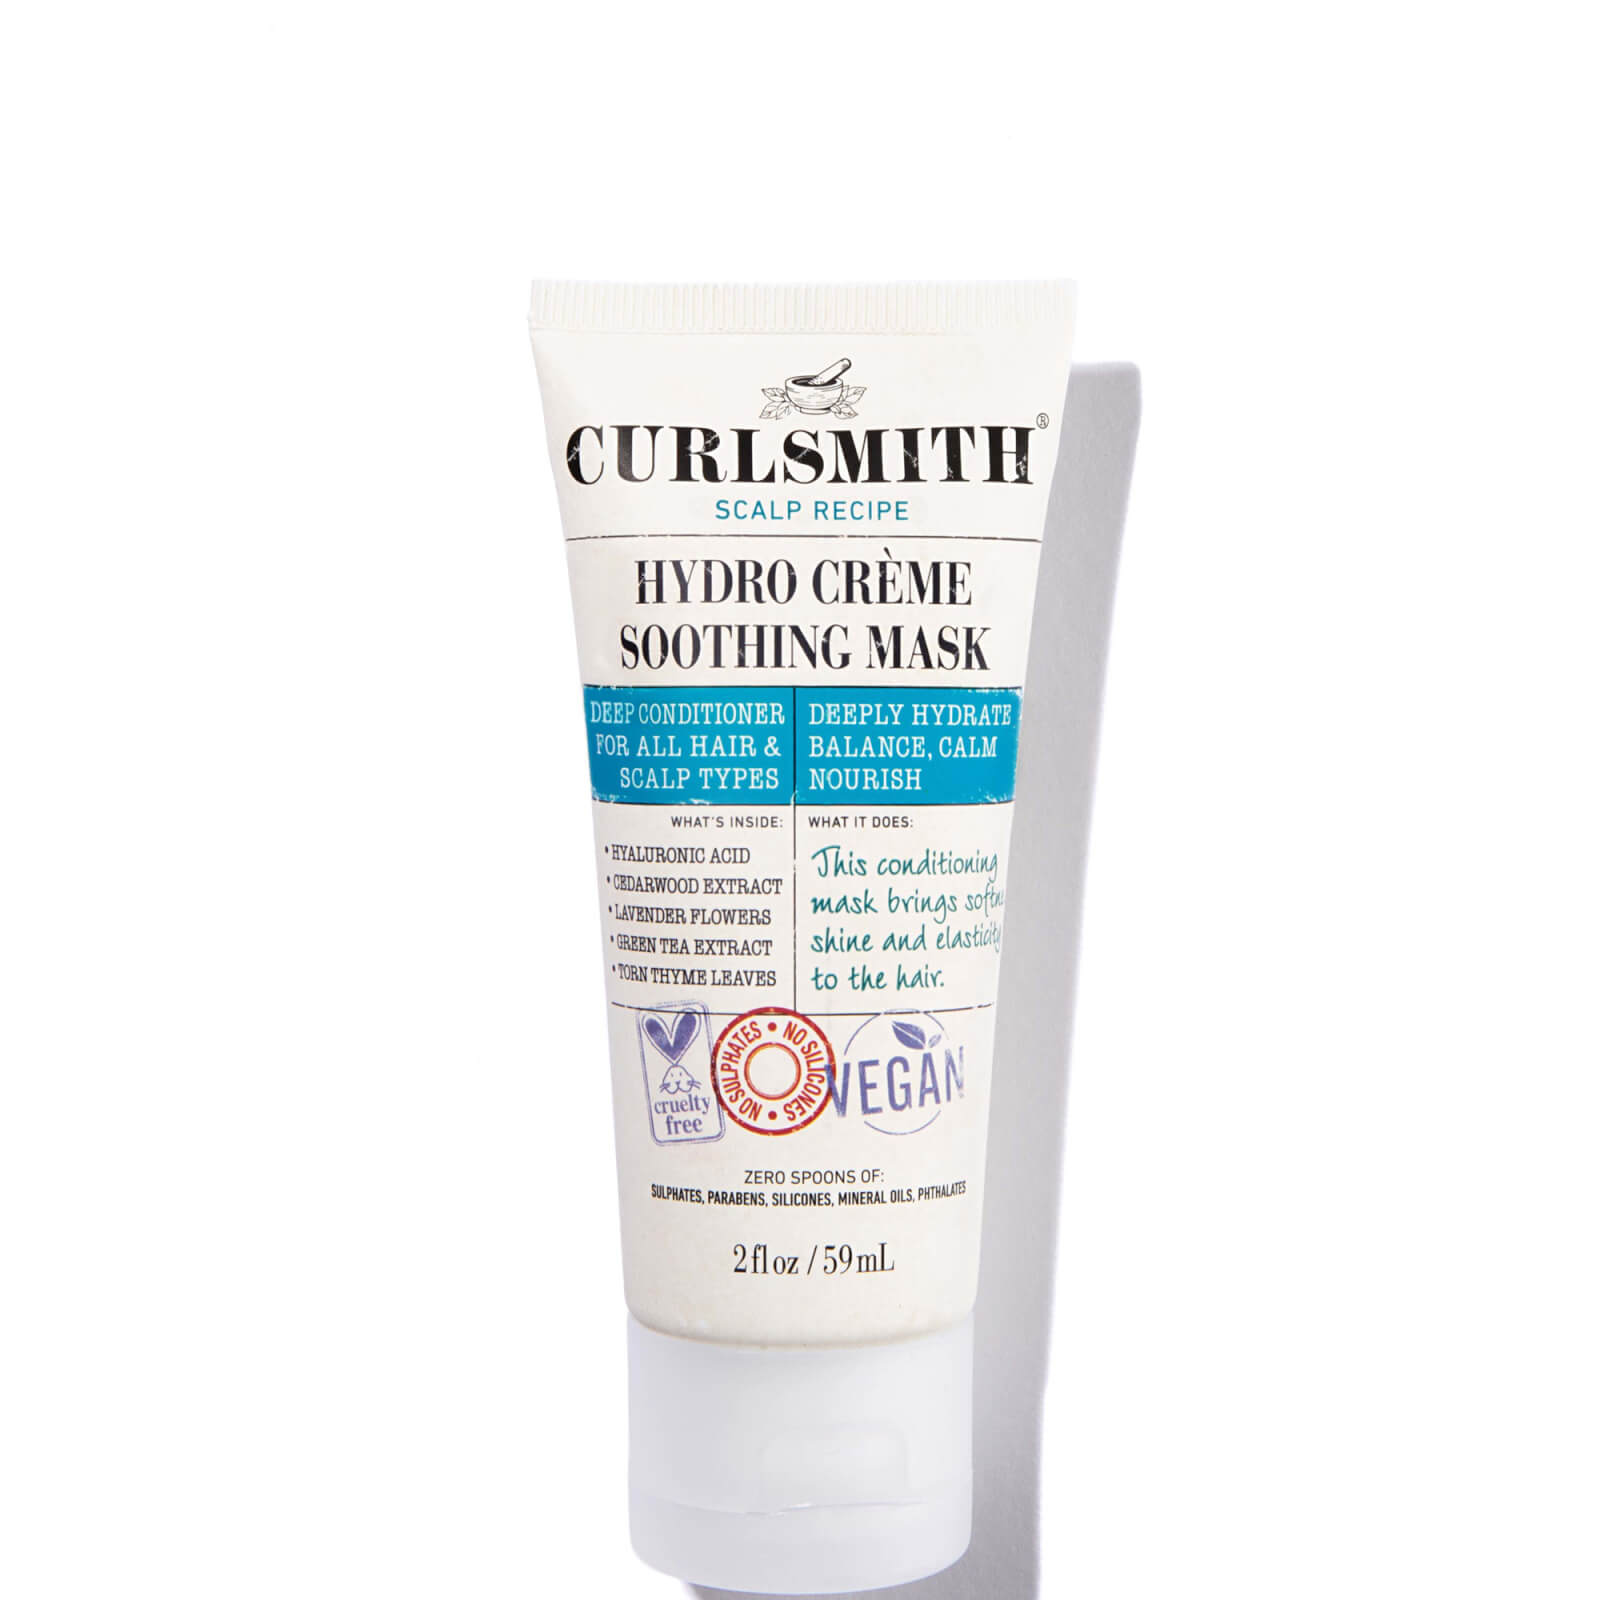 Photos - Facial Mask Curlsmith Hydro Crème Soothing Mask Travel Size 59ml 13063748583523